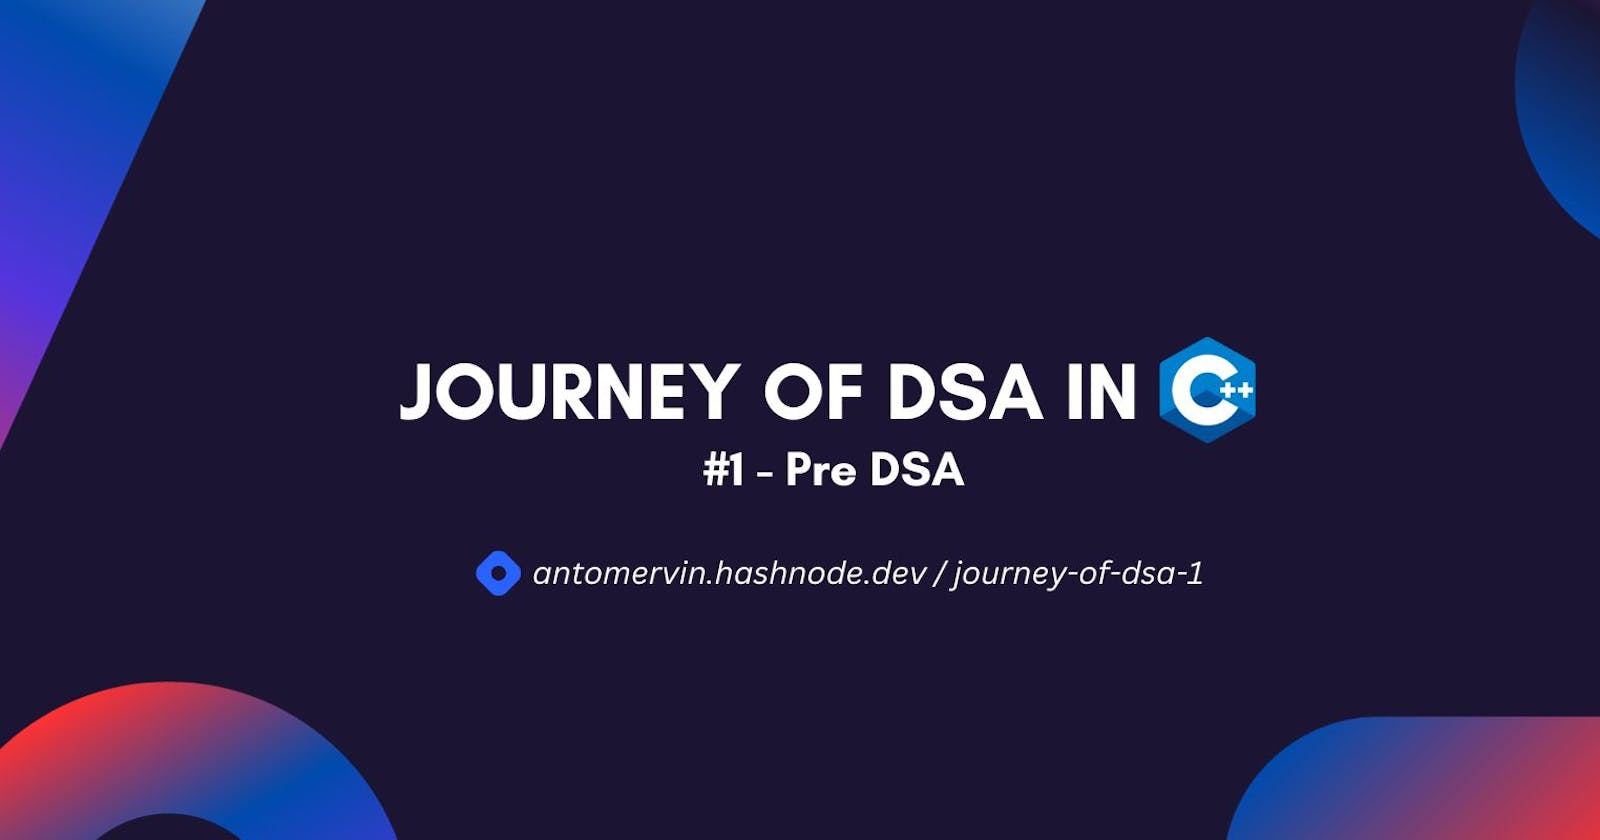 Getting Started - JOURNEY OF DSA IN C++